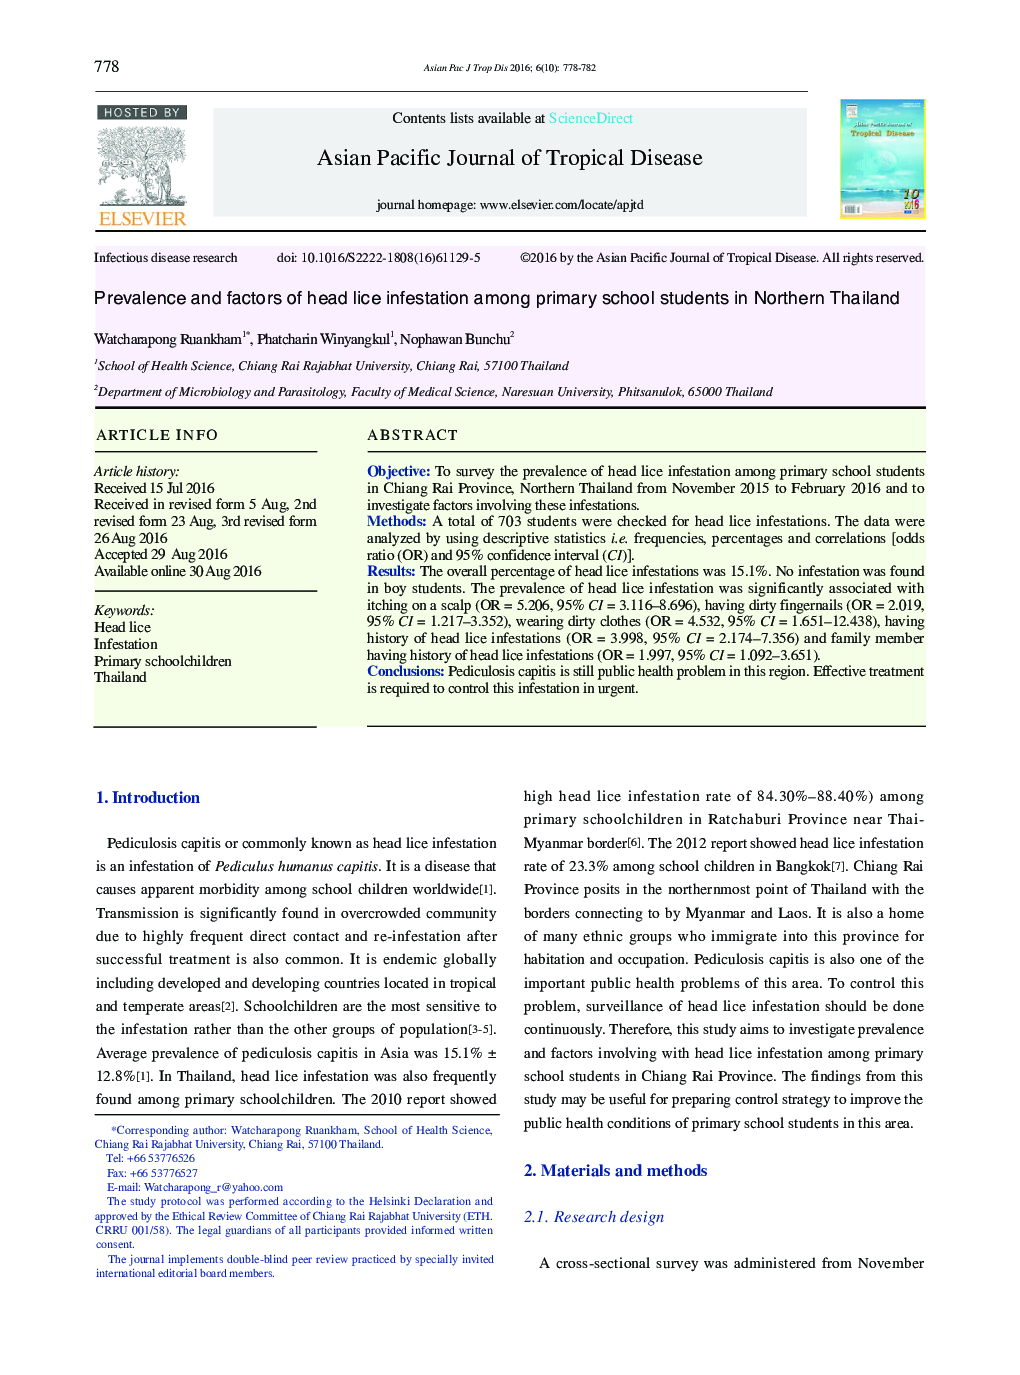 Prevalence and factors of head lice infestation among primary school students in Northern Thailand 